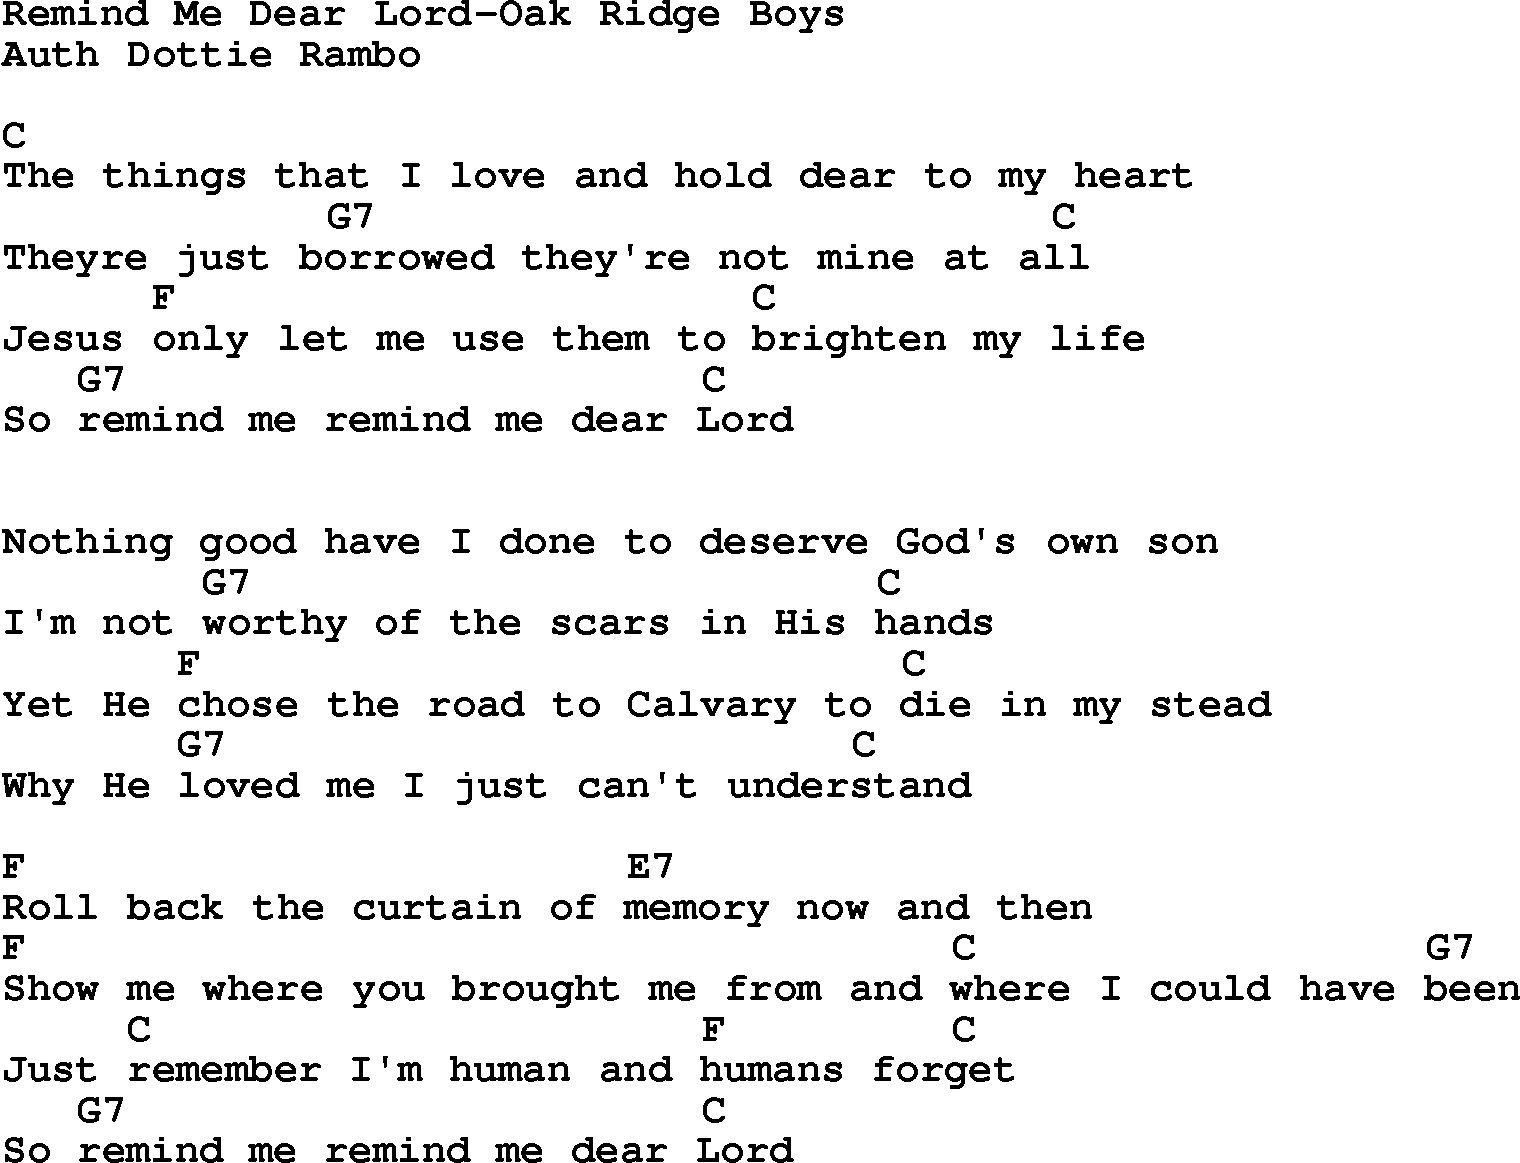 Country, Southern and Bluegrass Gospel Song Remind Me Dear Lord-Oak Ridge Boys lyrics and chords